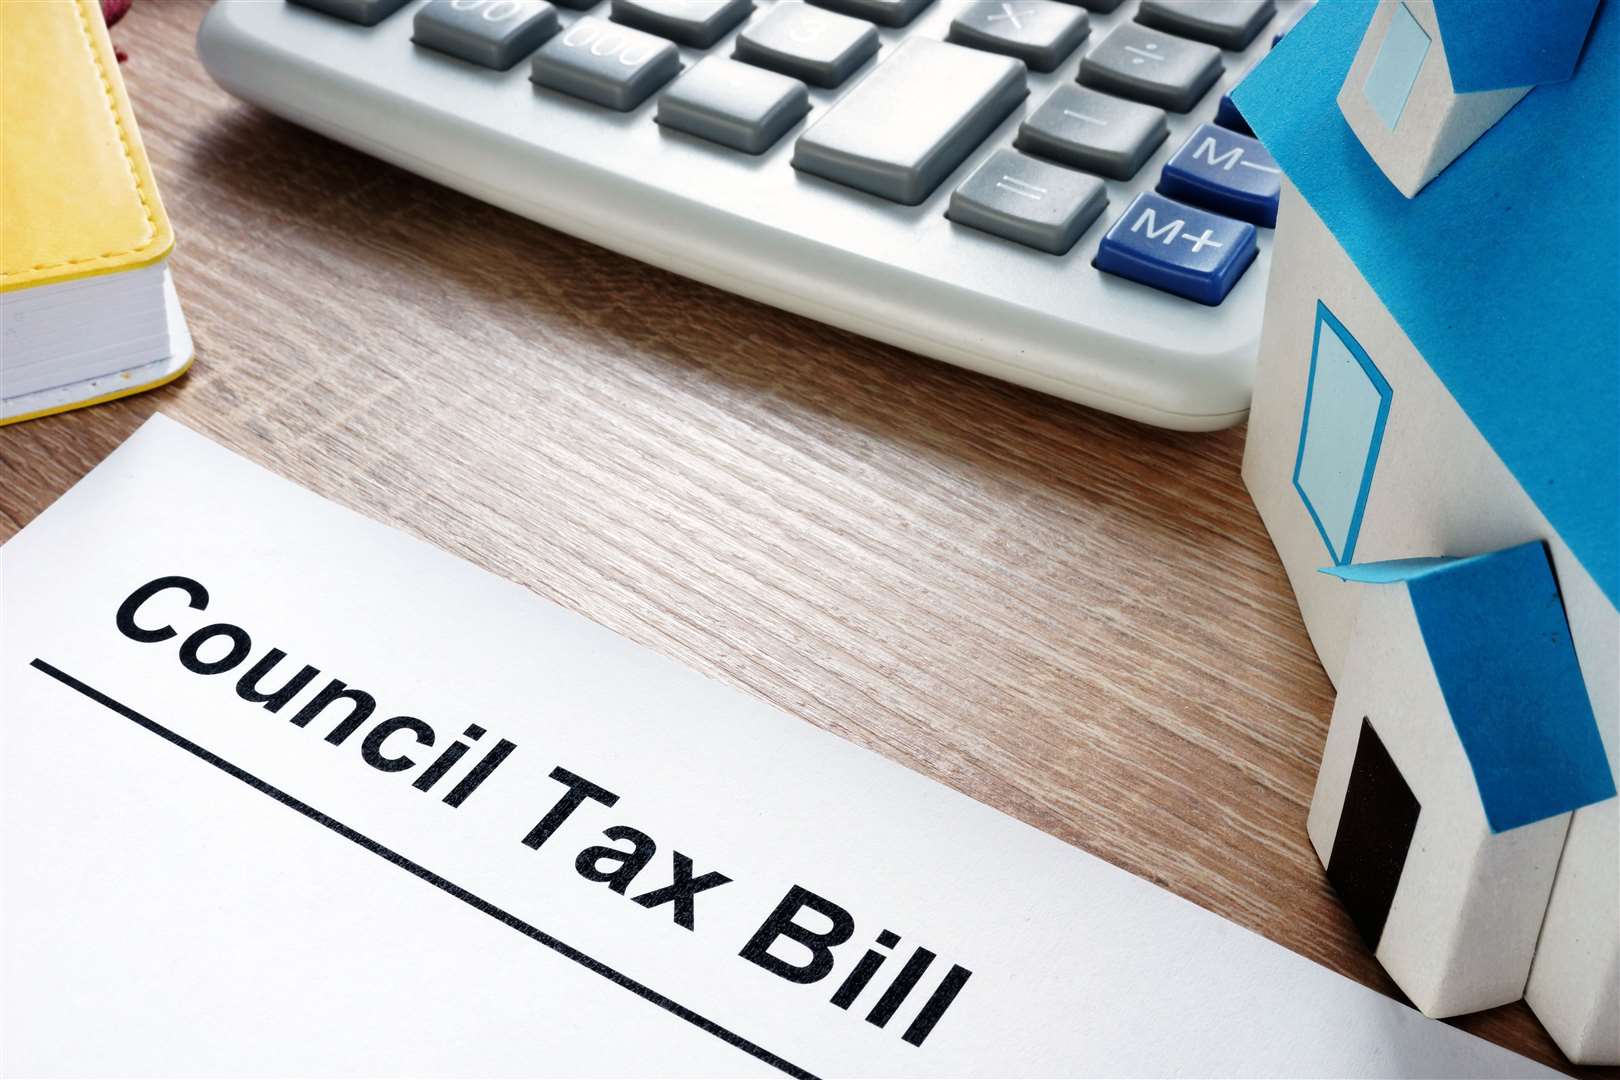 New powers enabling councils to charge up to double the full rate of council tax on second homes come into force this week.